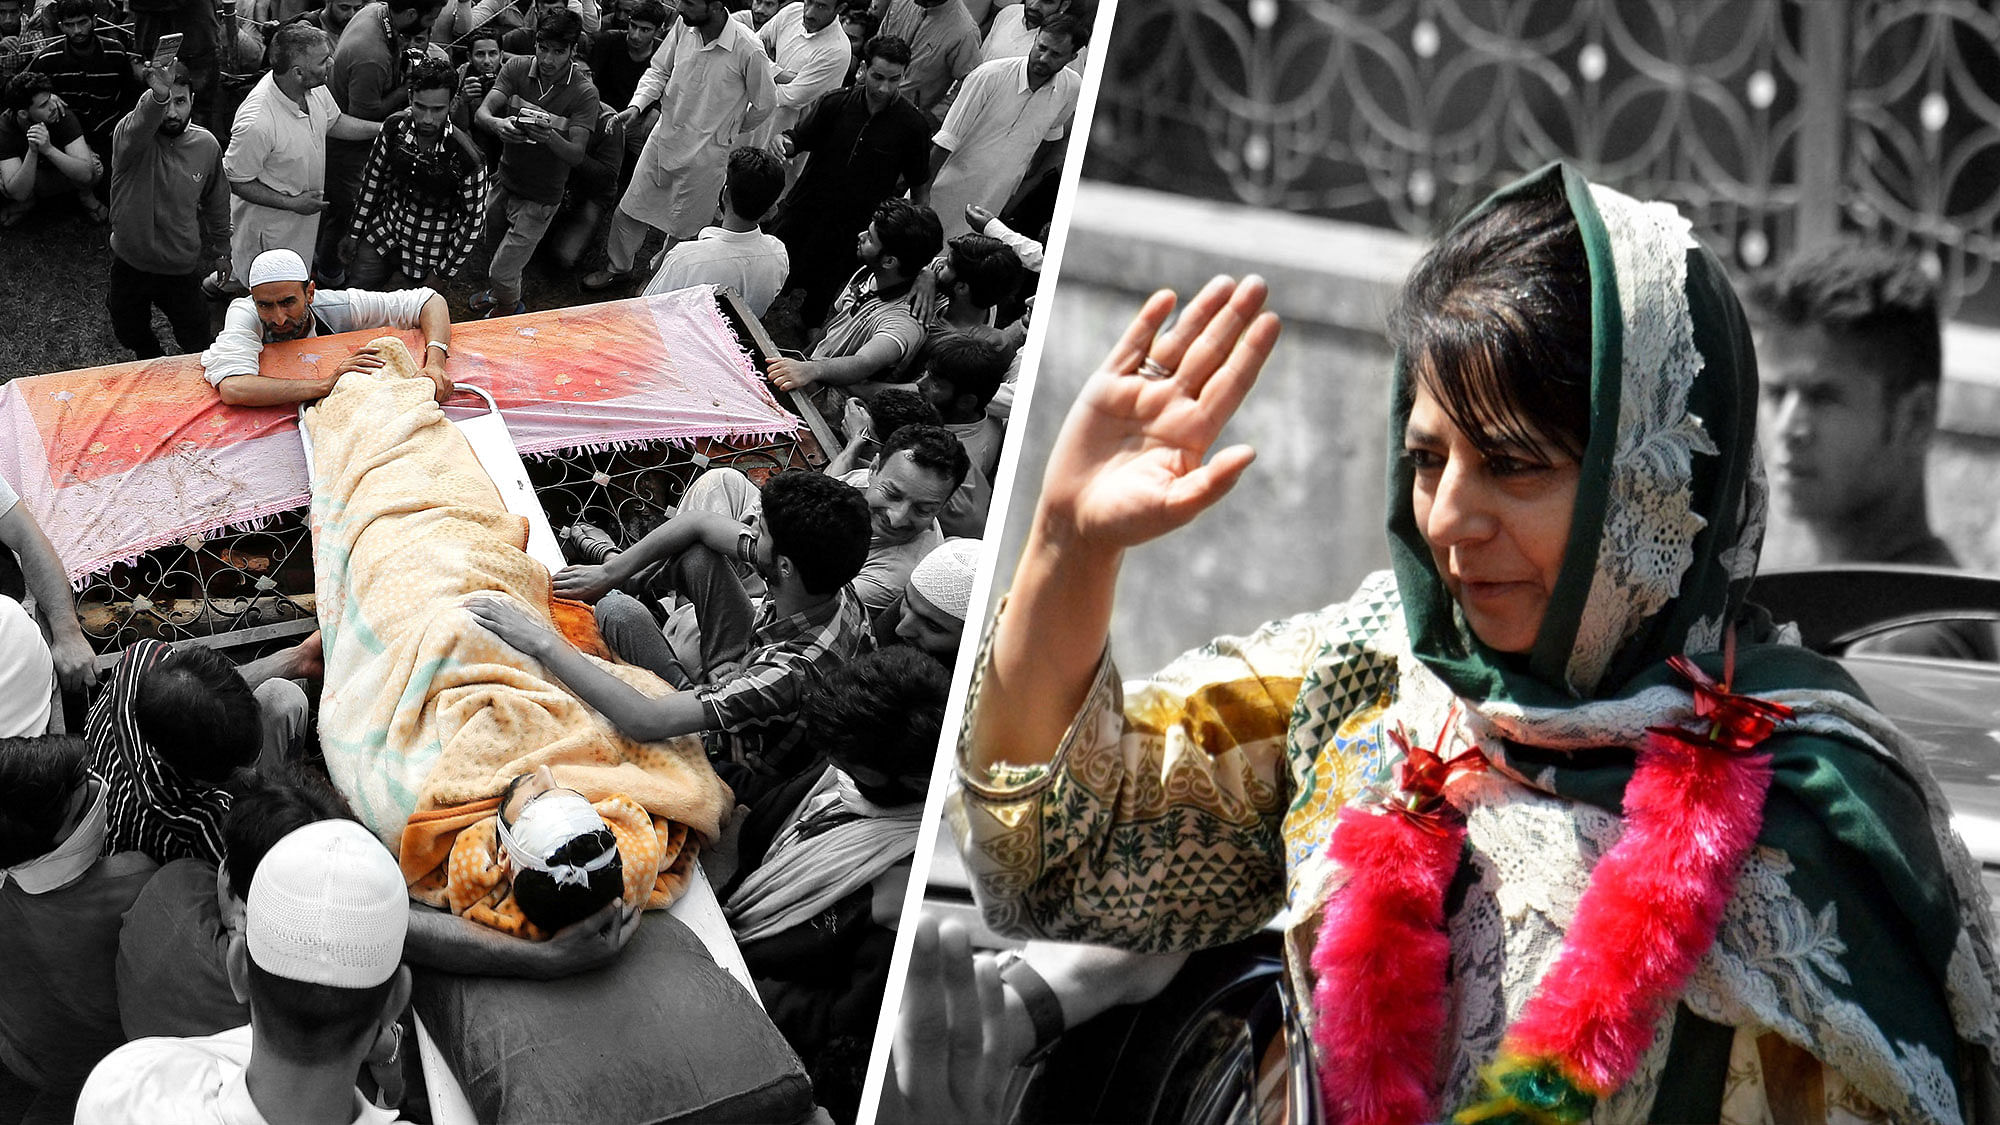 Funeral procession of Hizbul commander, Burhan Wani (L), Jammu and Kashmir chief minister, Mehbooba Mufti (R). (Photo: Agencies/ Altered by <b>The Quint</b>)